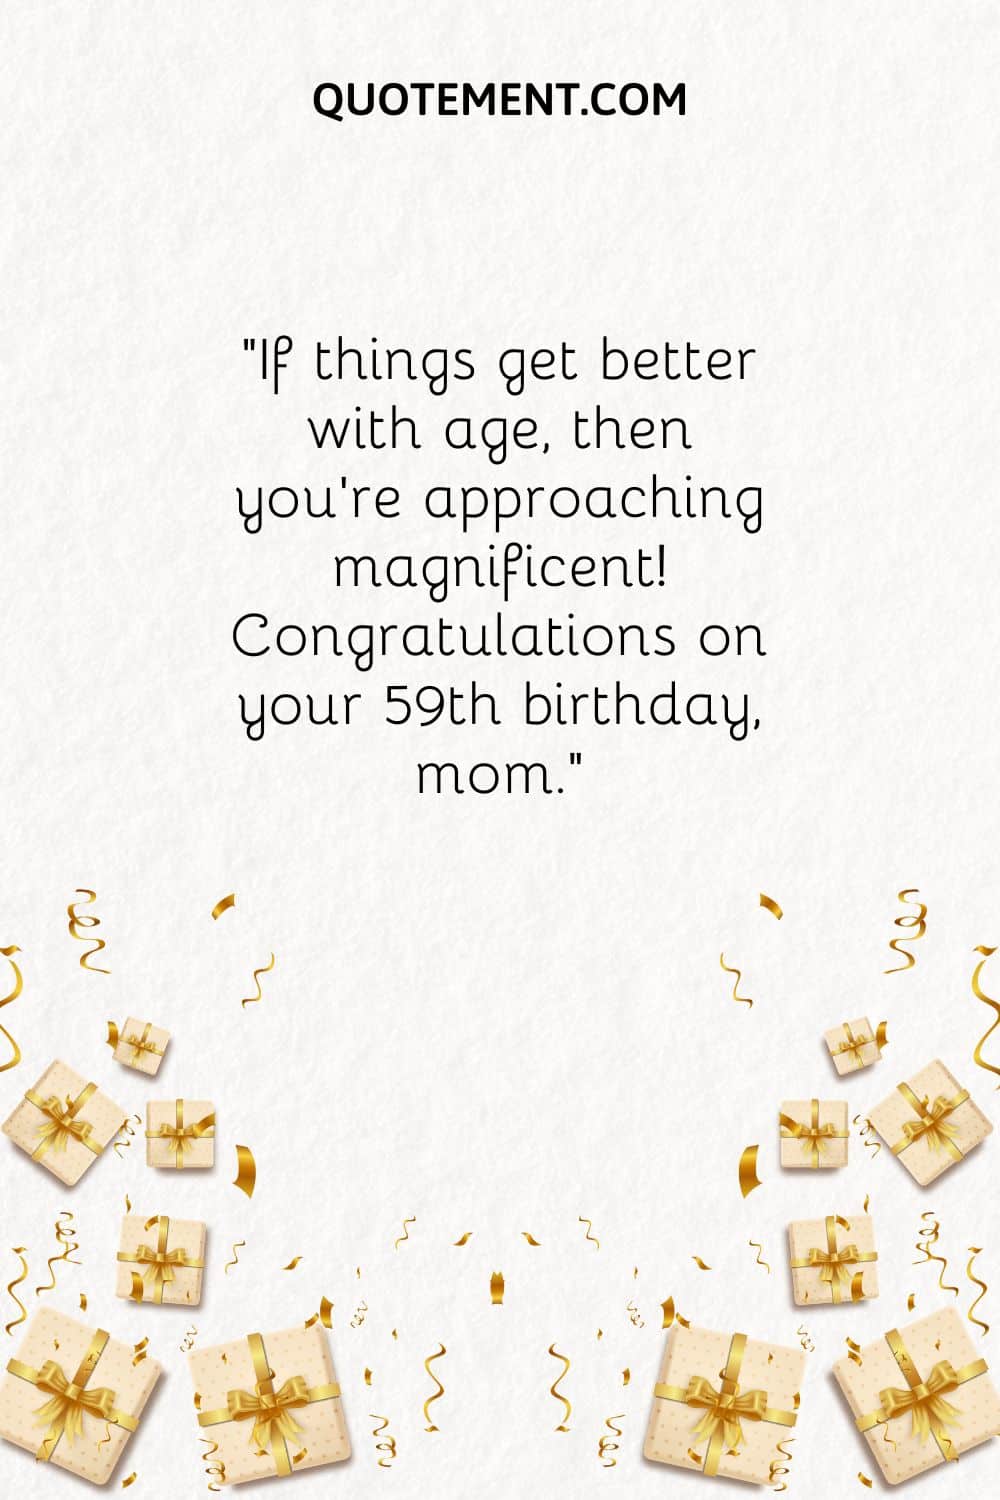 If things get better with age, then you're approaching magnificent